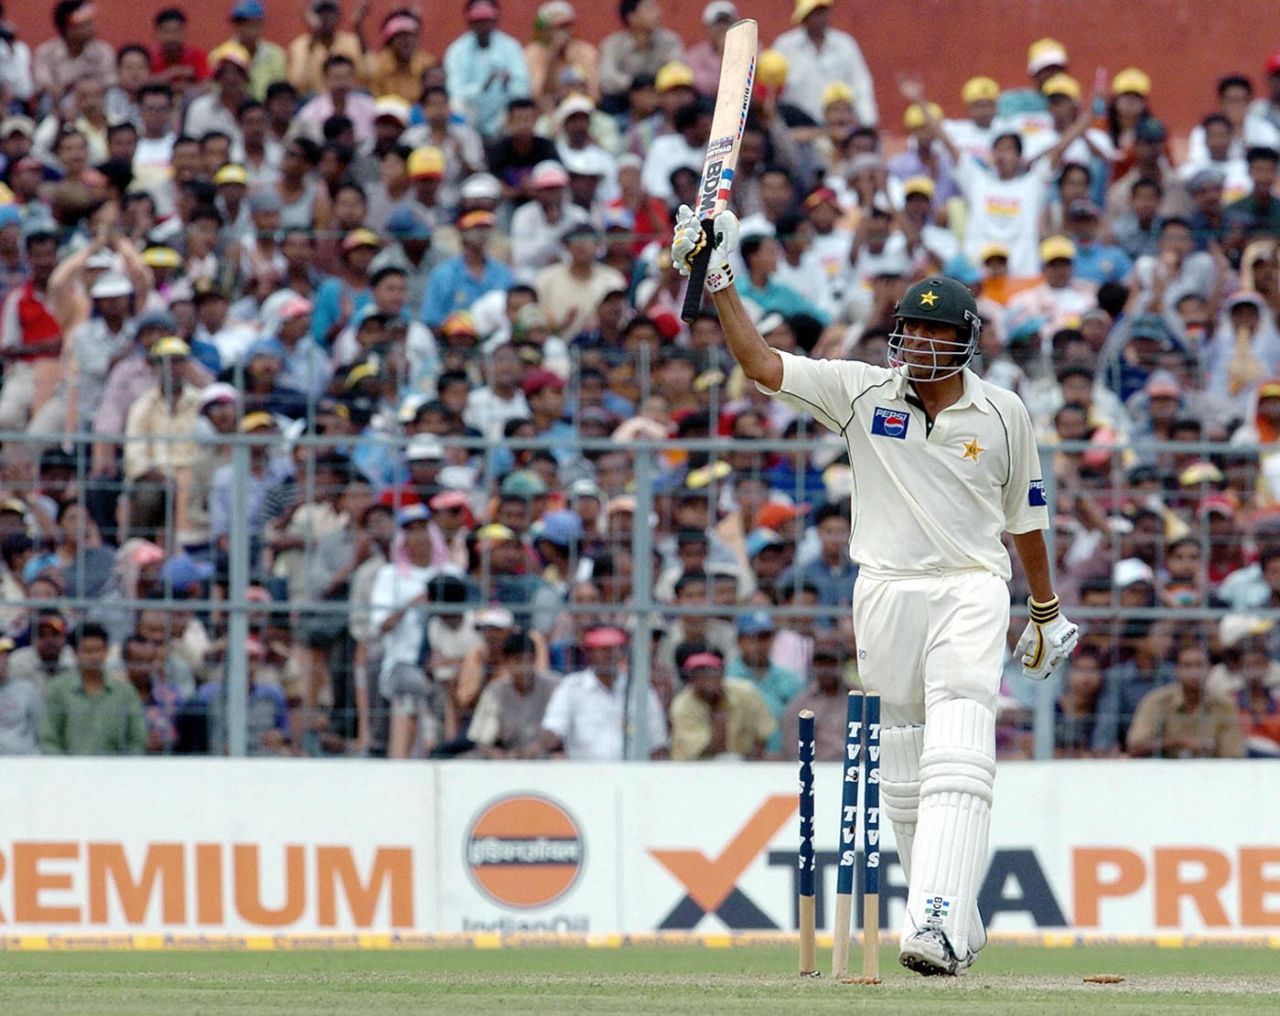 Younis Khan acknowledges the applause for his century, India v Pakistan, second Test, day two, Kolkata, March 17, 2005